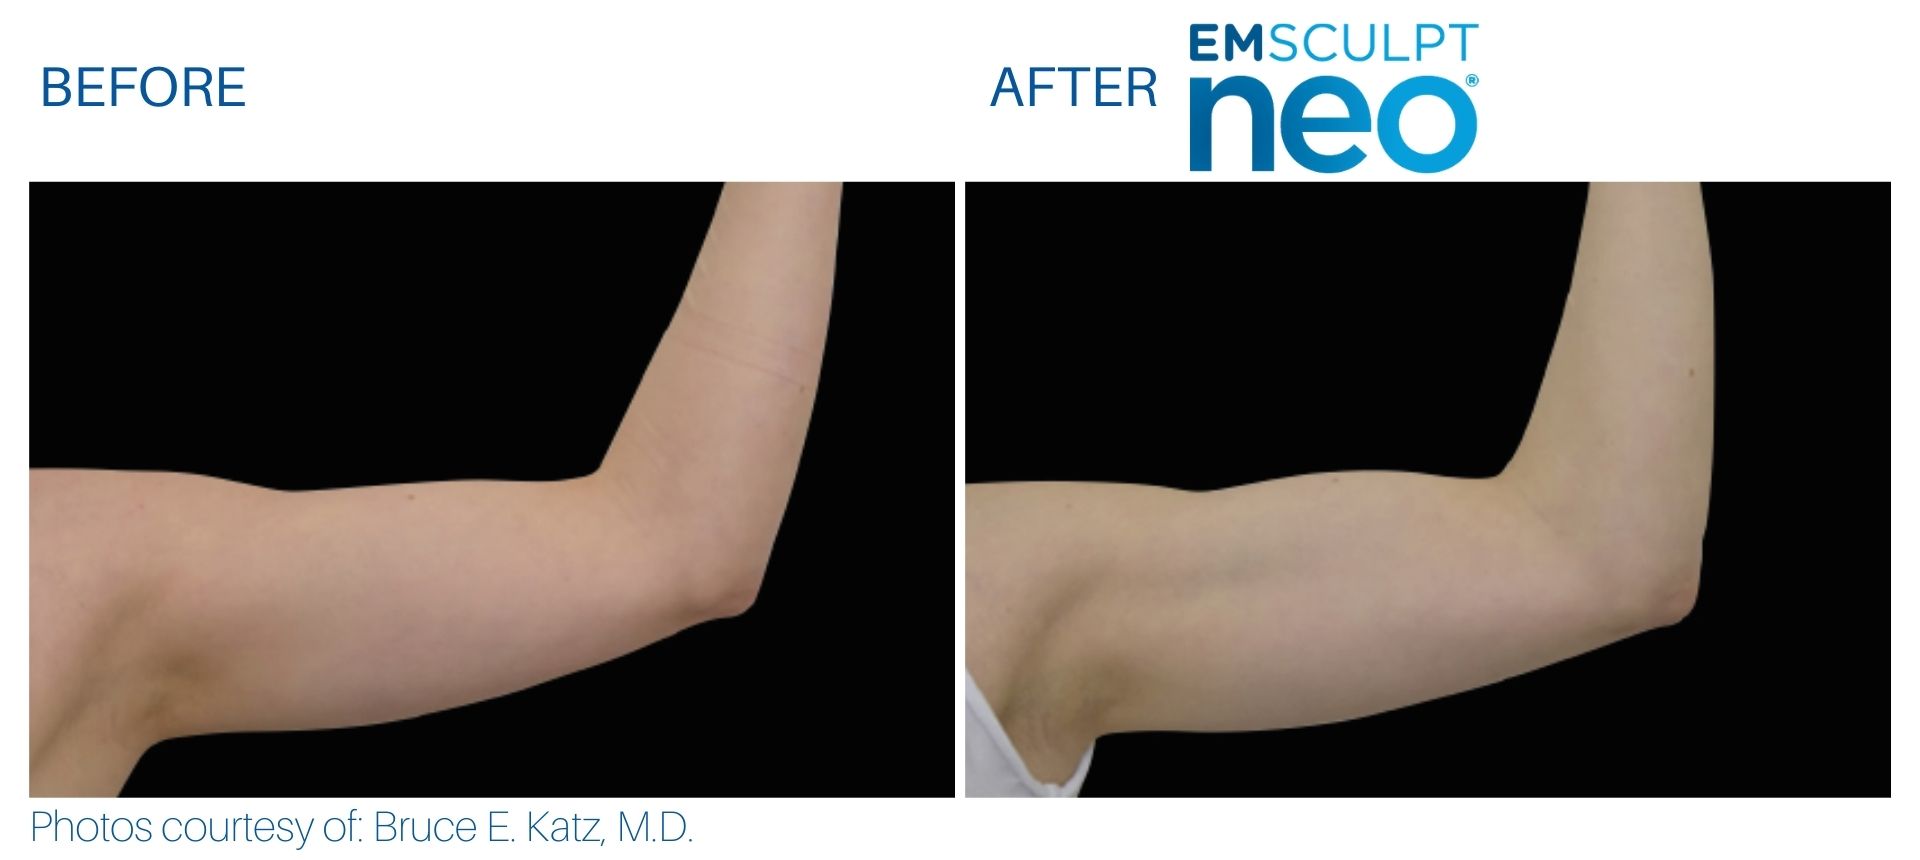 Biceps Before And After Results From Emsculpt Neo Treatments At Optimum Human In Albuquerque, Nm.